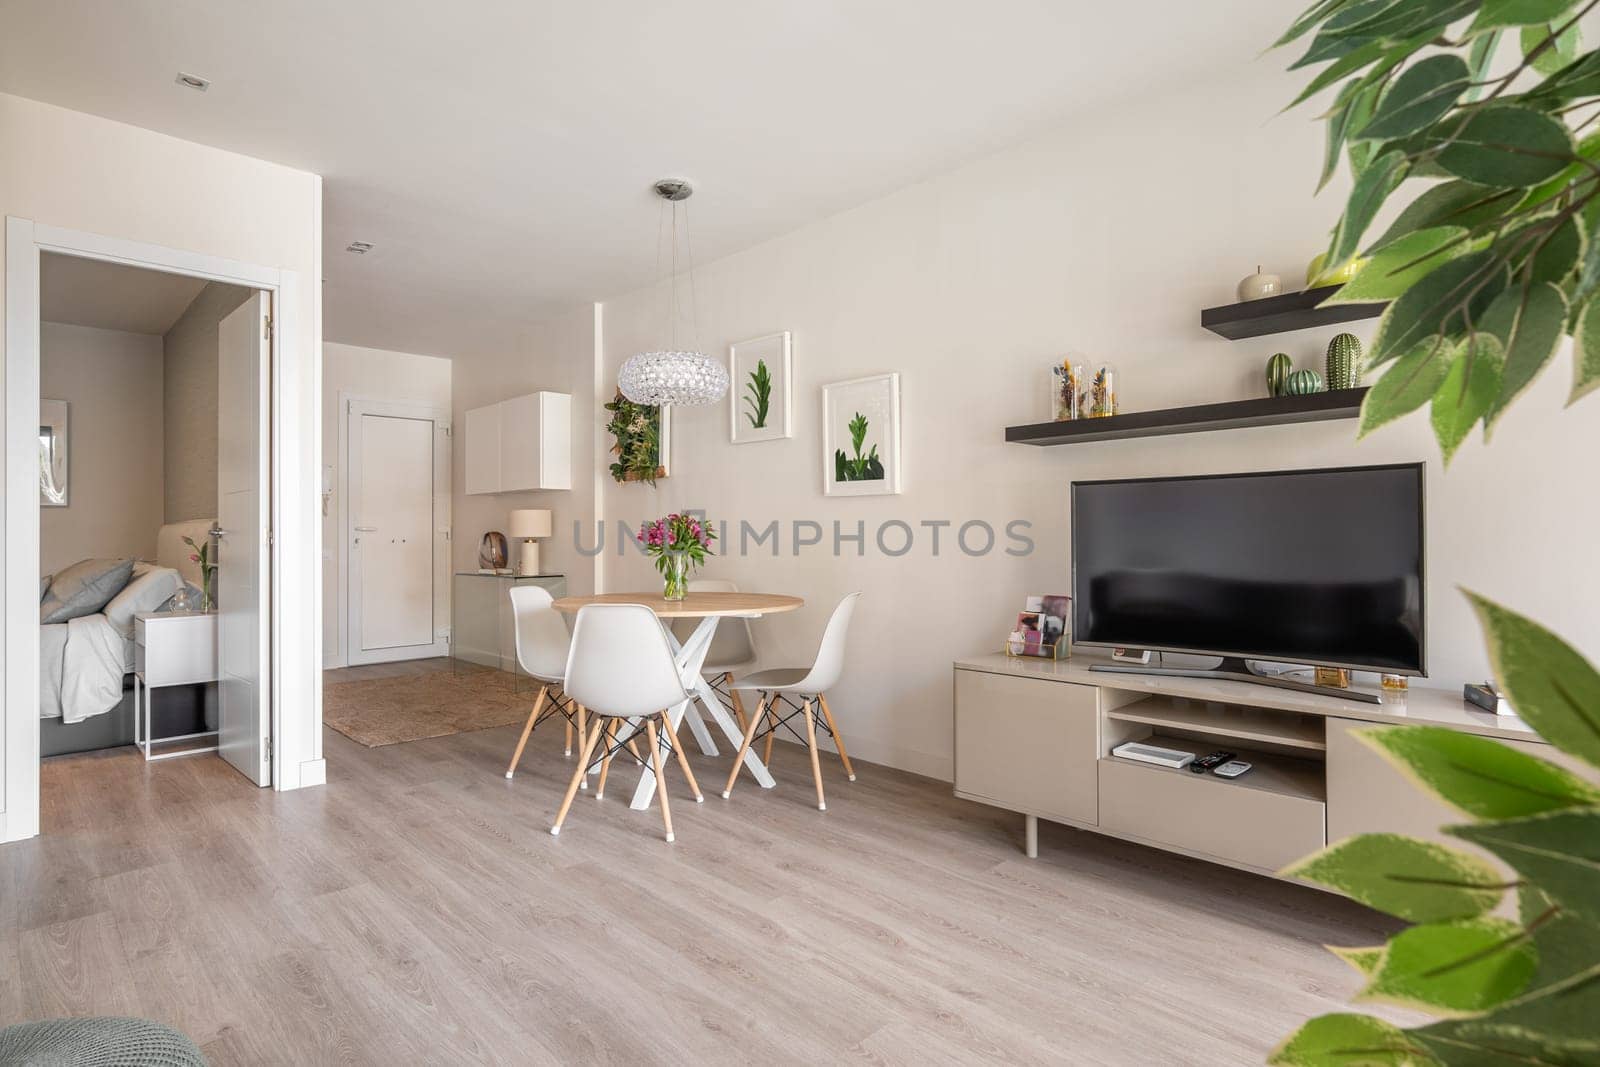 Modern interior in compact apartment with a spacious combined living room with table, chairs and TV and decorative accessories overlooking the bedroom and bathroom. Stylish city real estate concept by apavlin